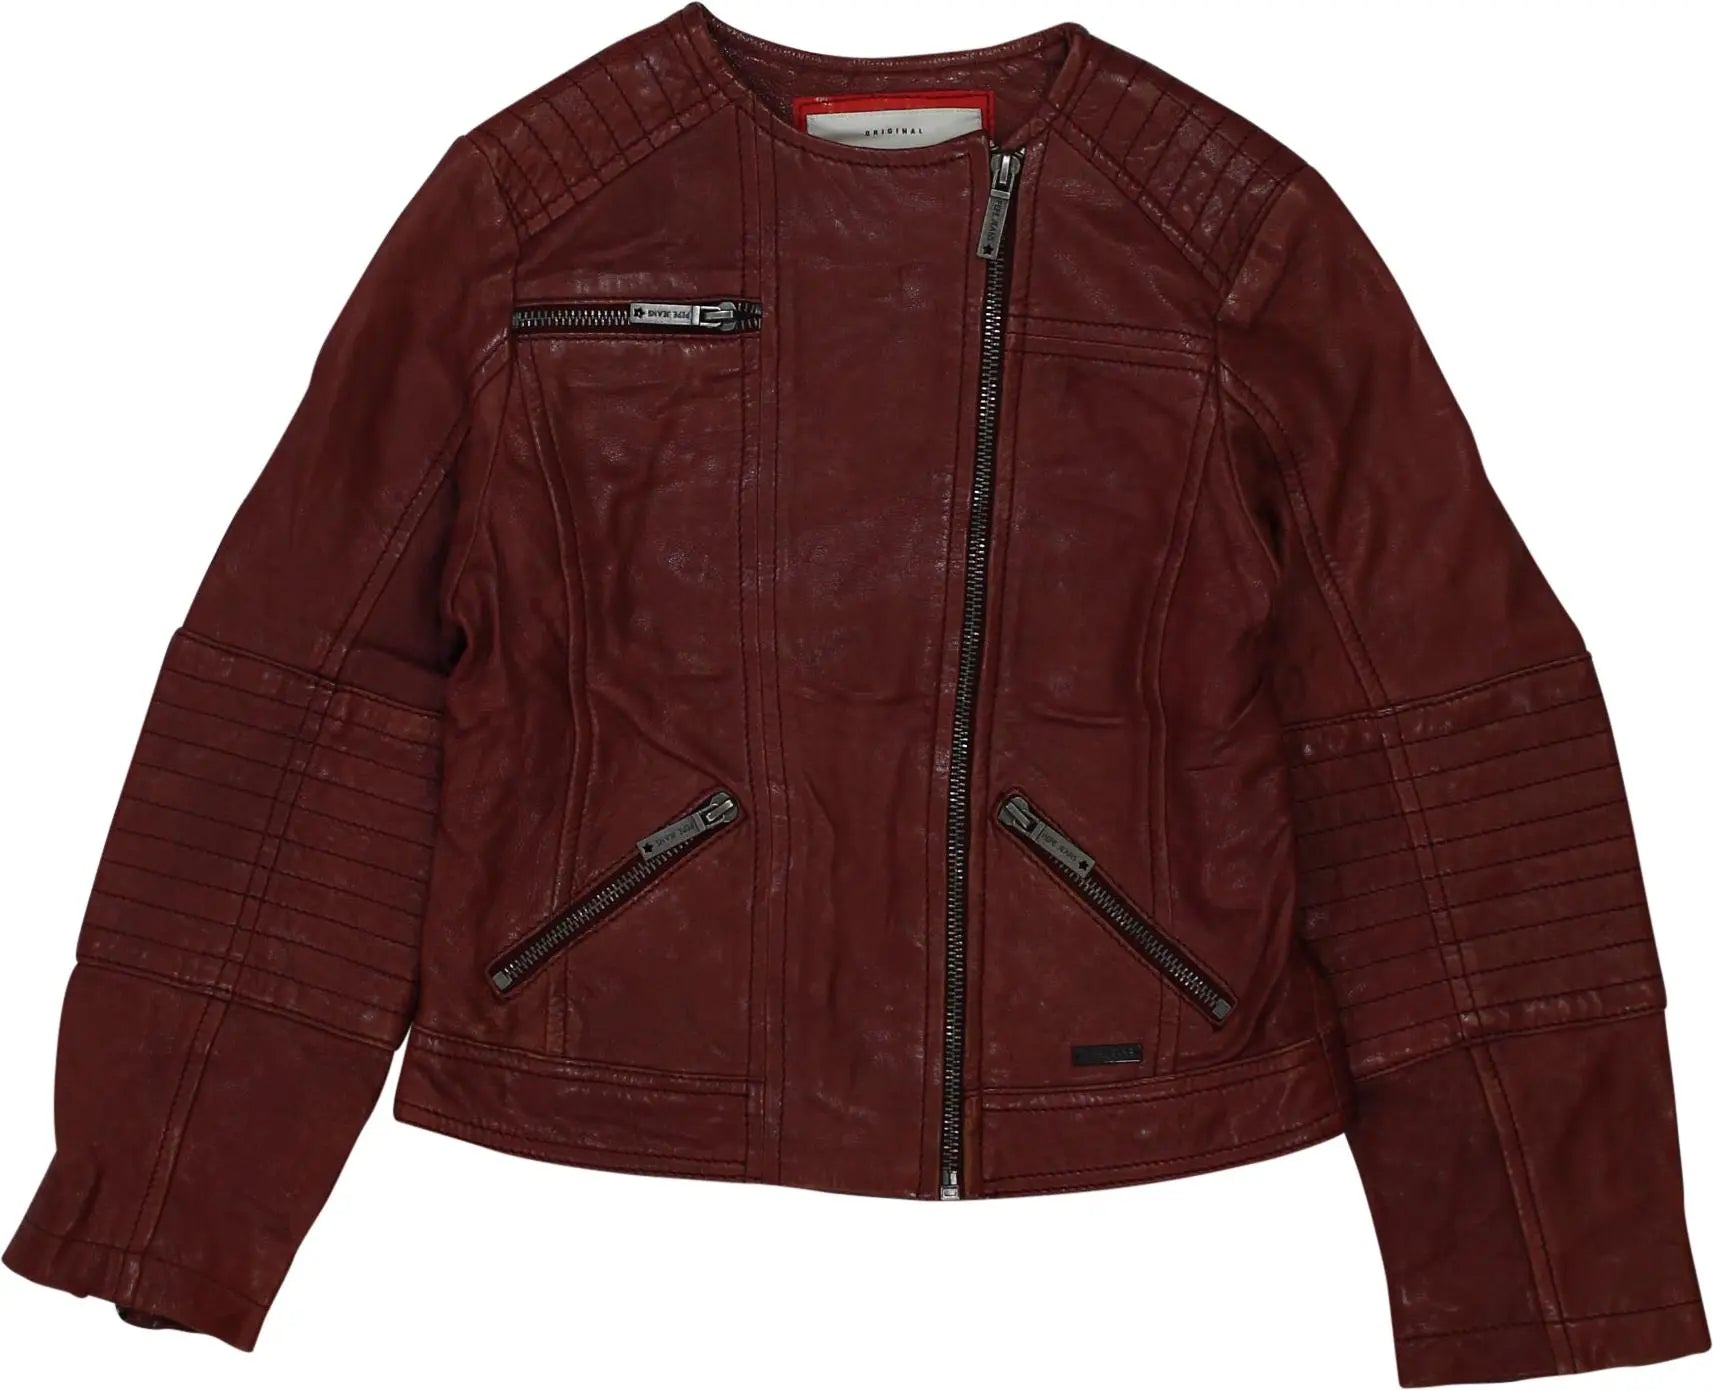 Pepe Jeans - Red Leather Jacket by Pepe Jeans- ThriftTale.com - Vintage and second handclothing